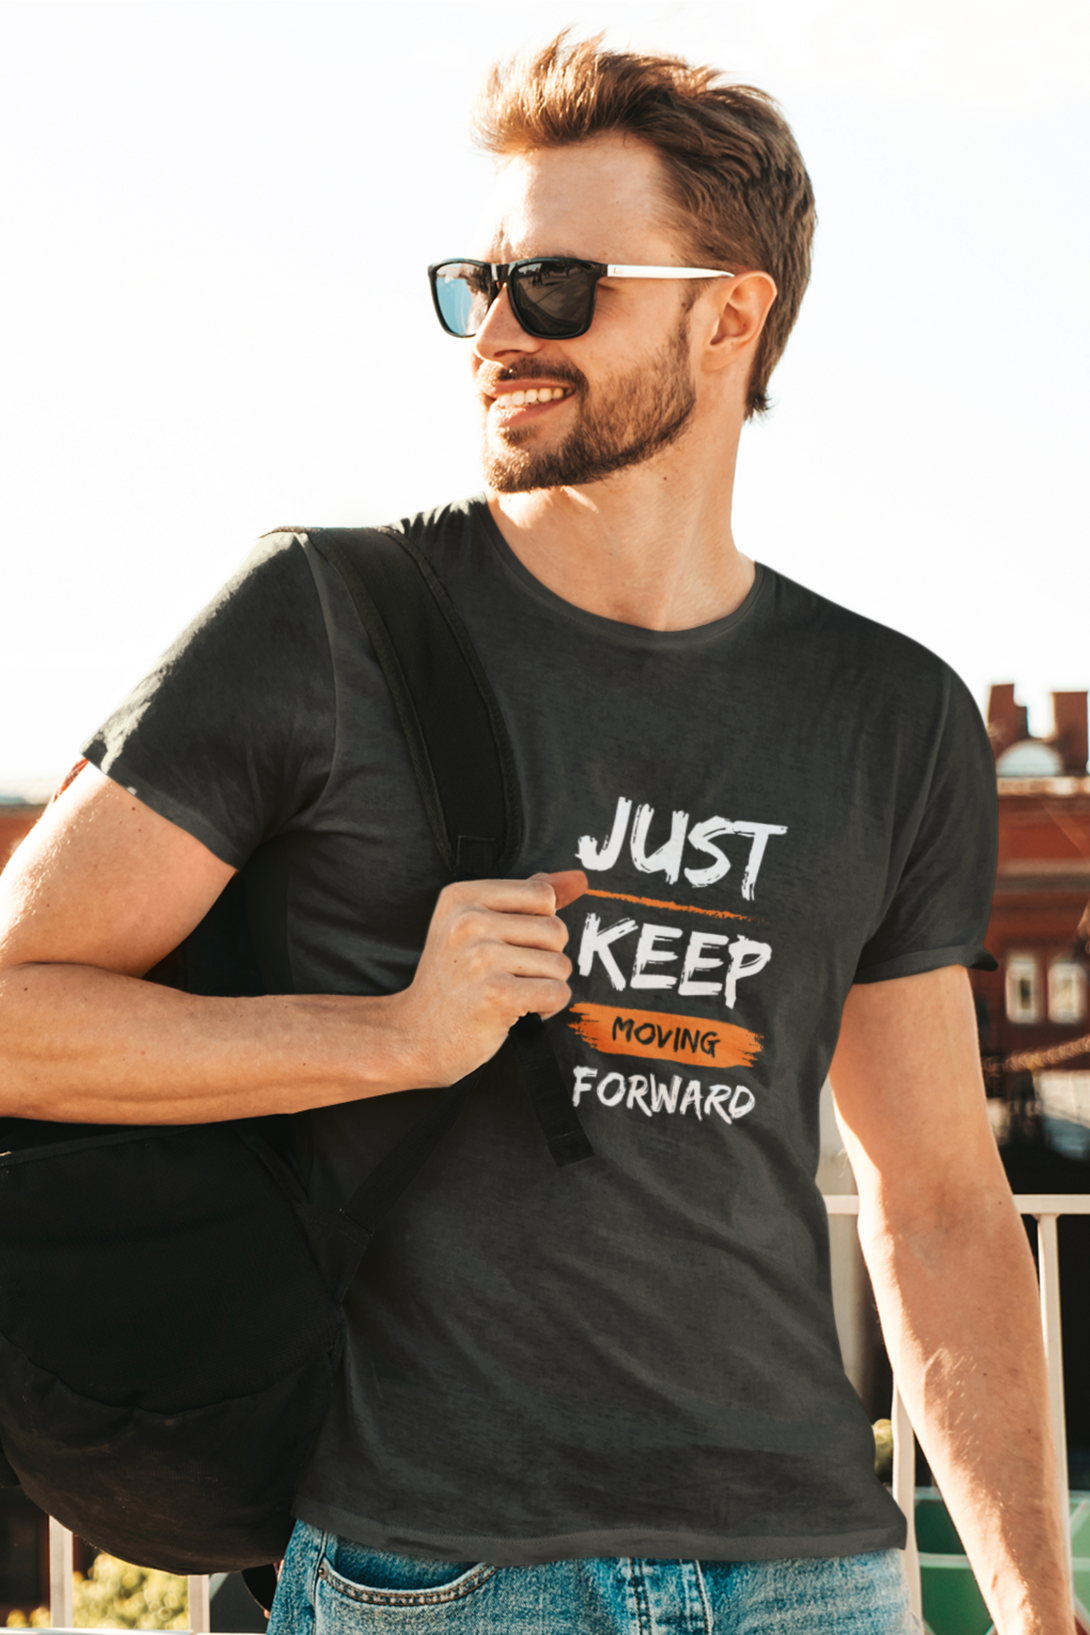 Keep Moving Forward Printed T-Shirt For Men - WowWaves - 6